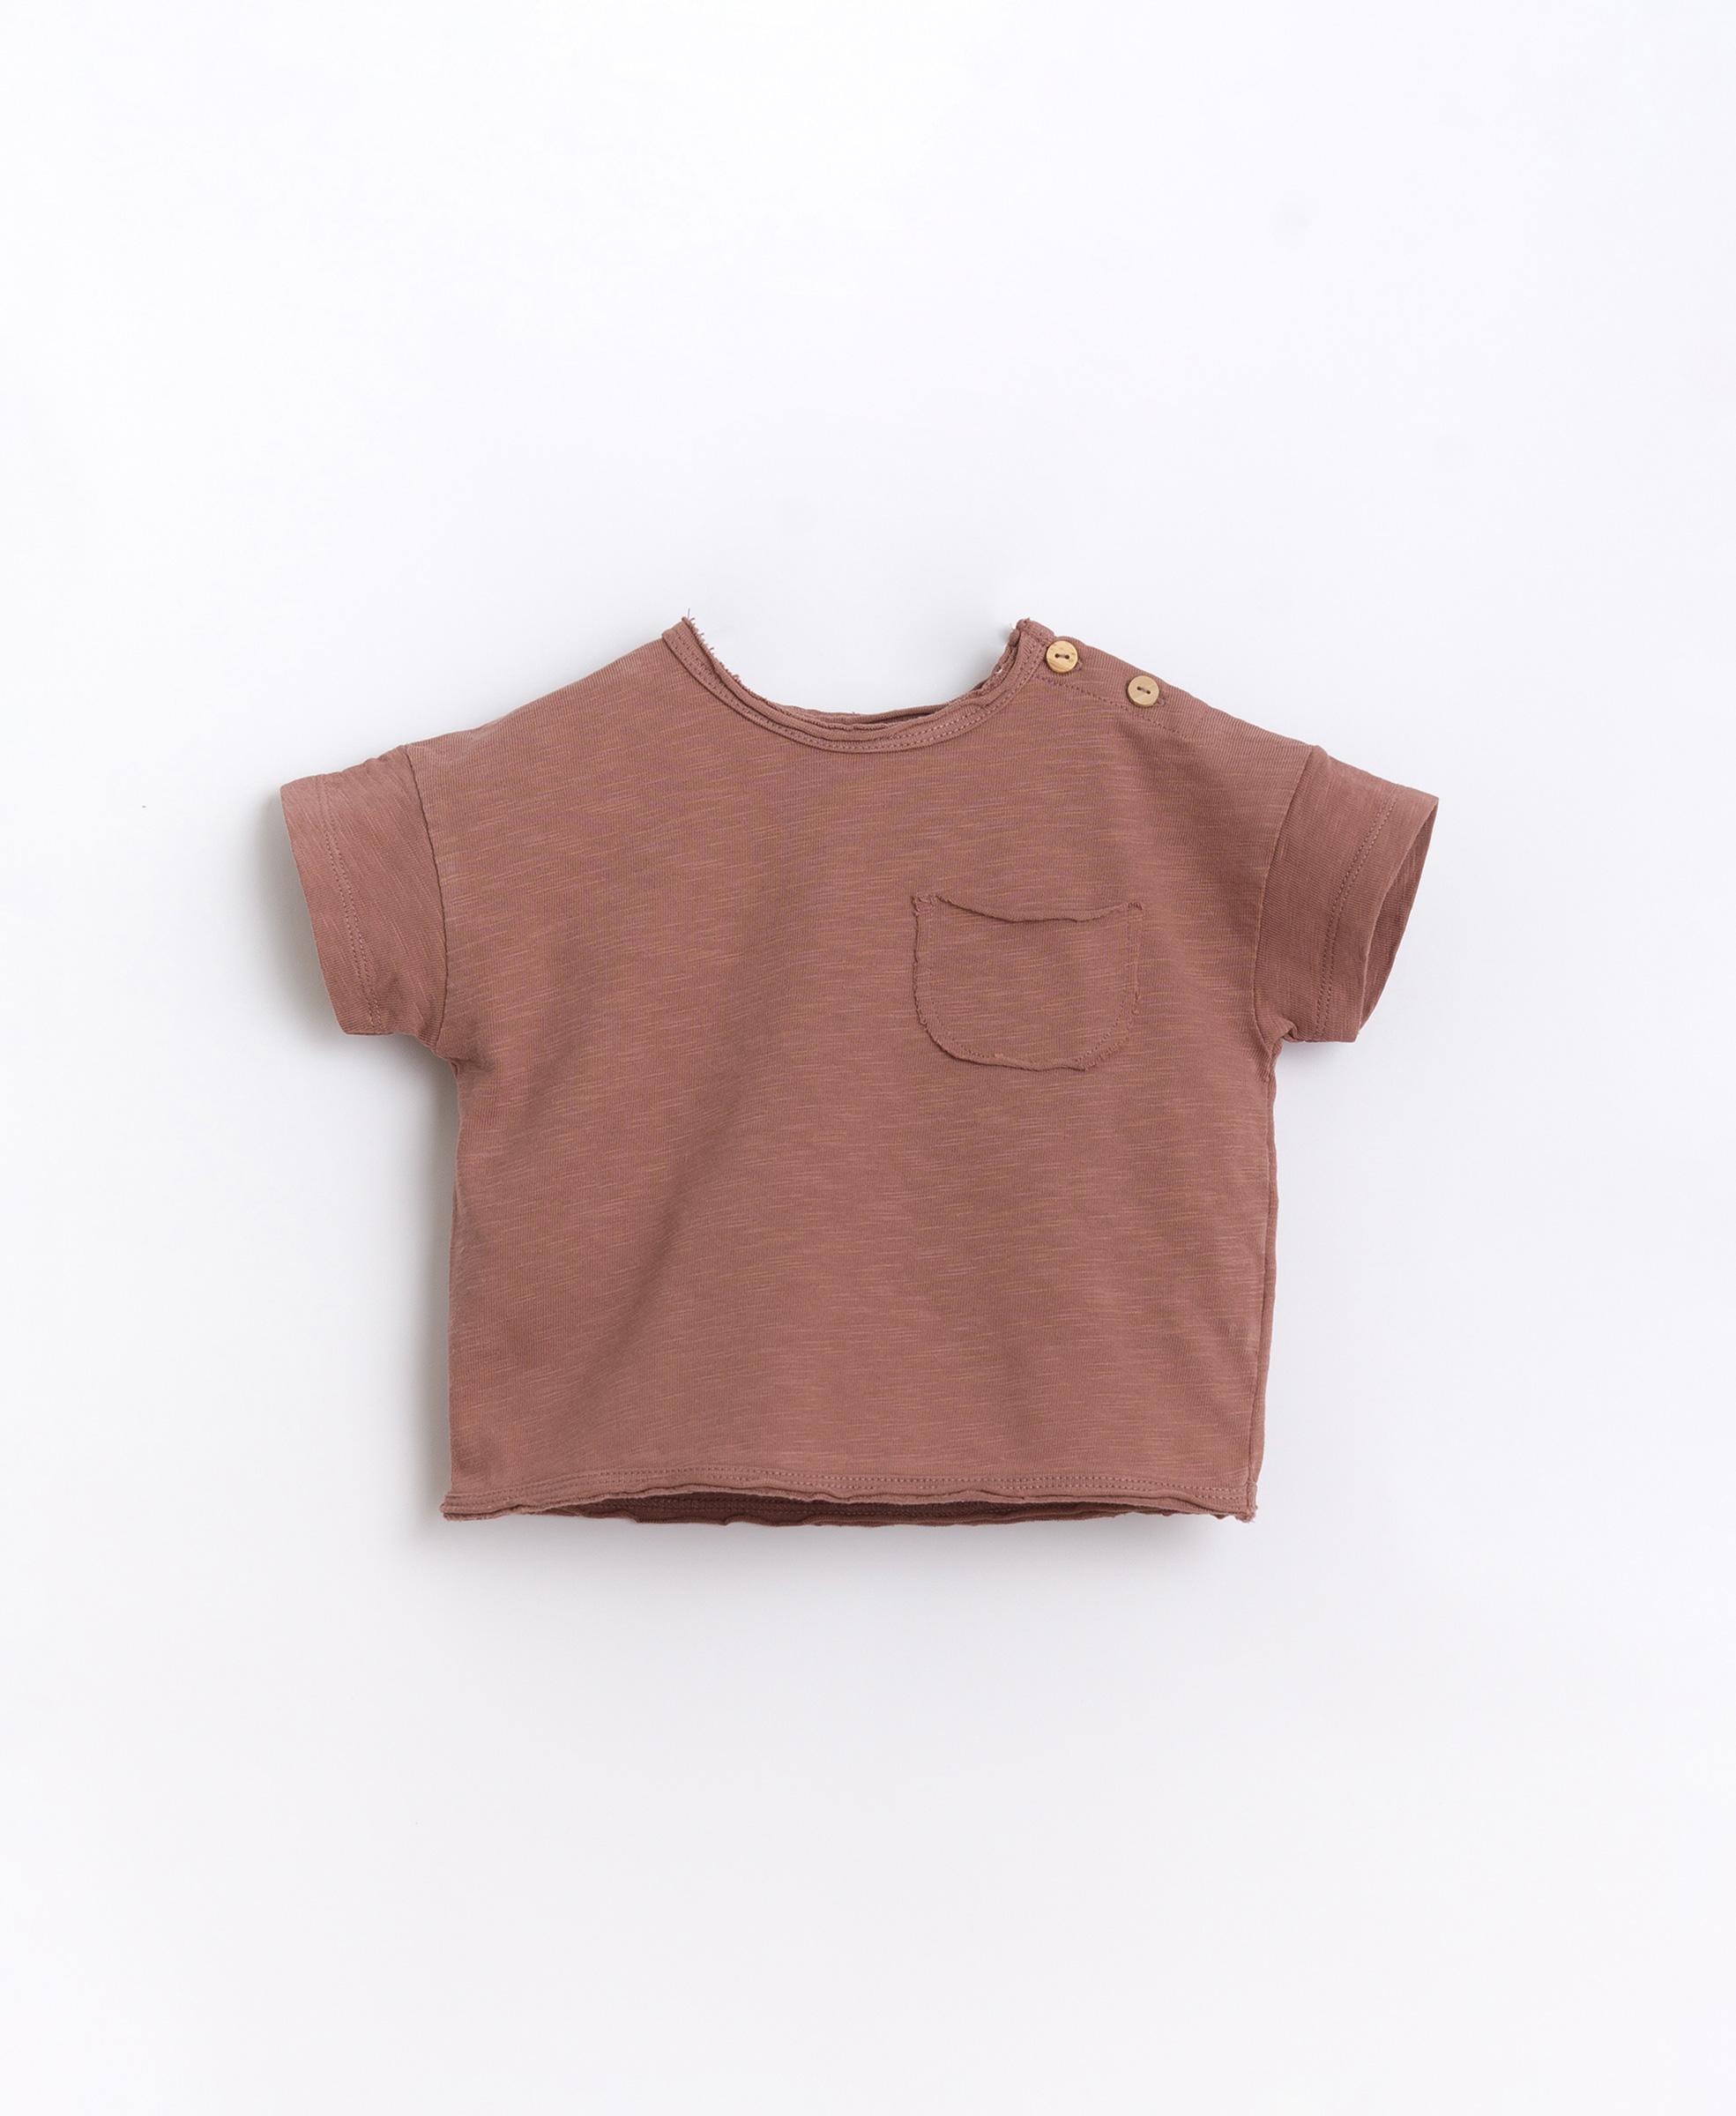 T-shirt in organic cotton with wooden buttons